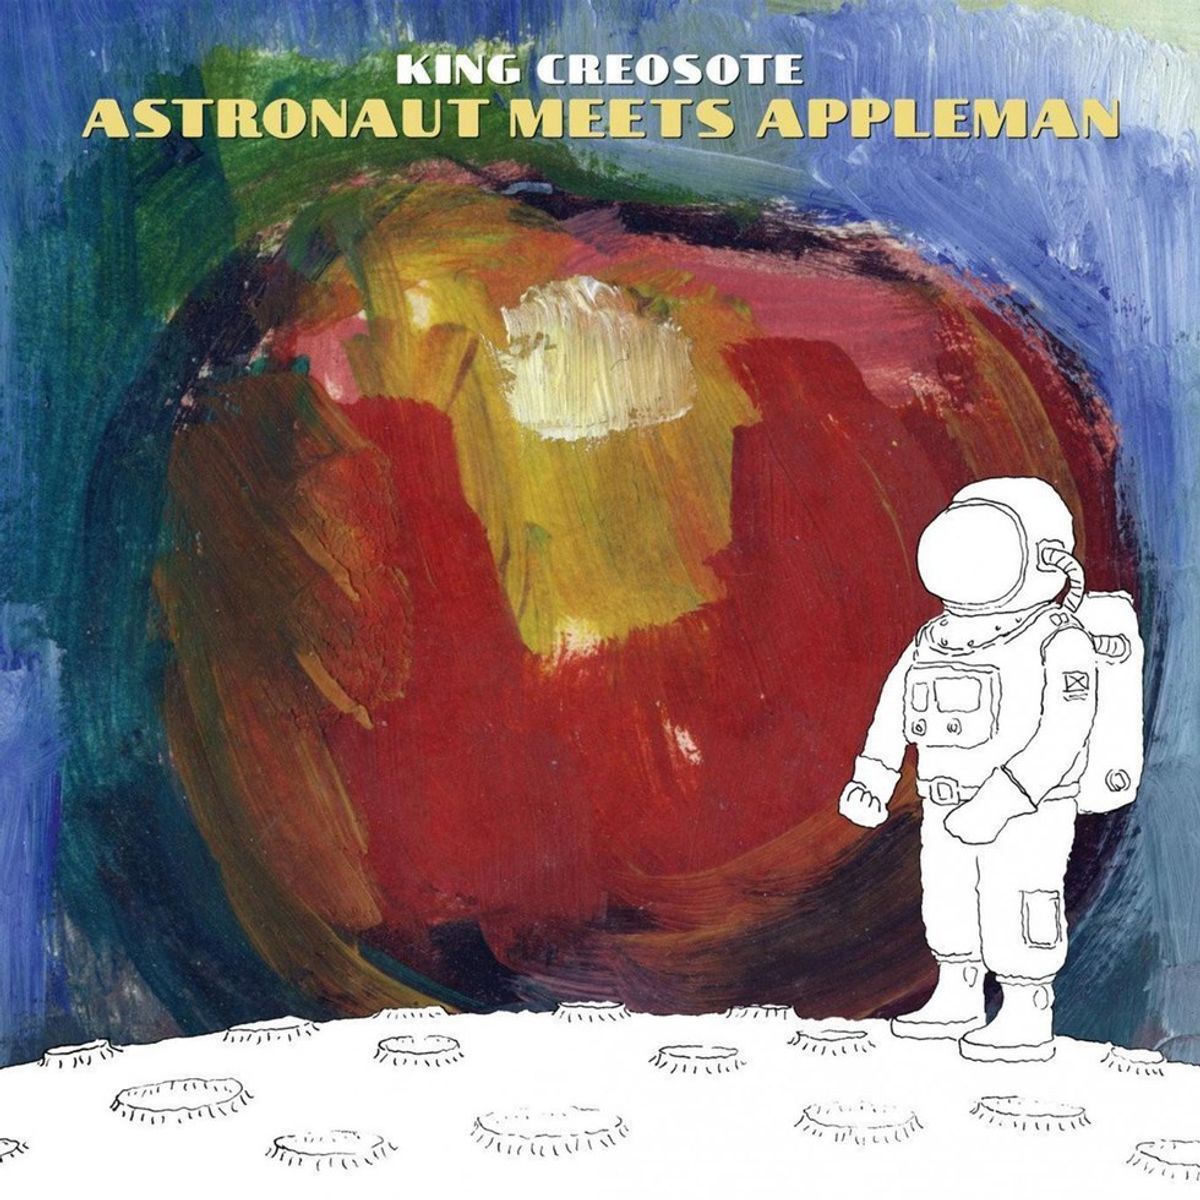 ASTRONAUT MEETS APPLEMAN - King Creosote comes back to his roots